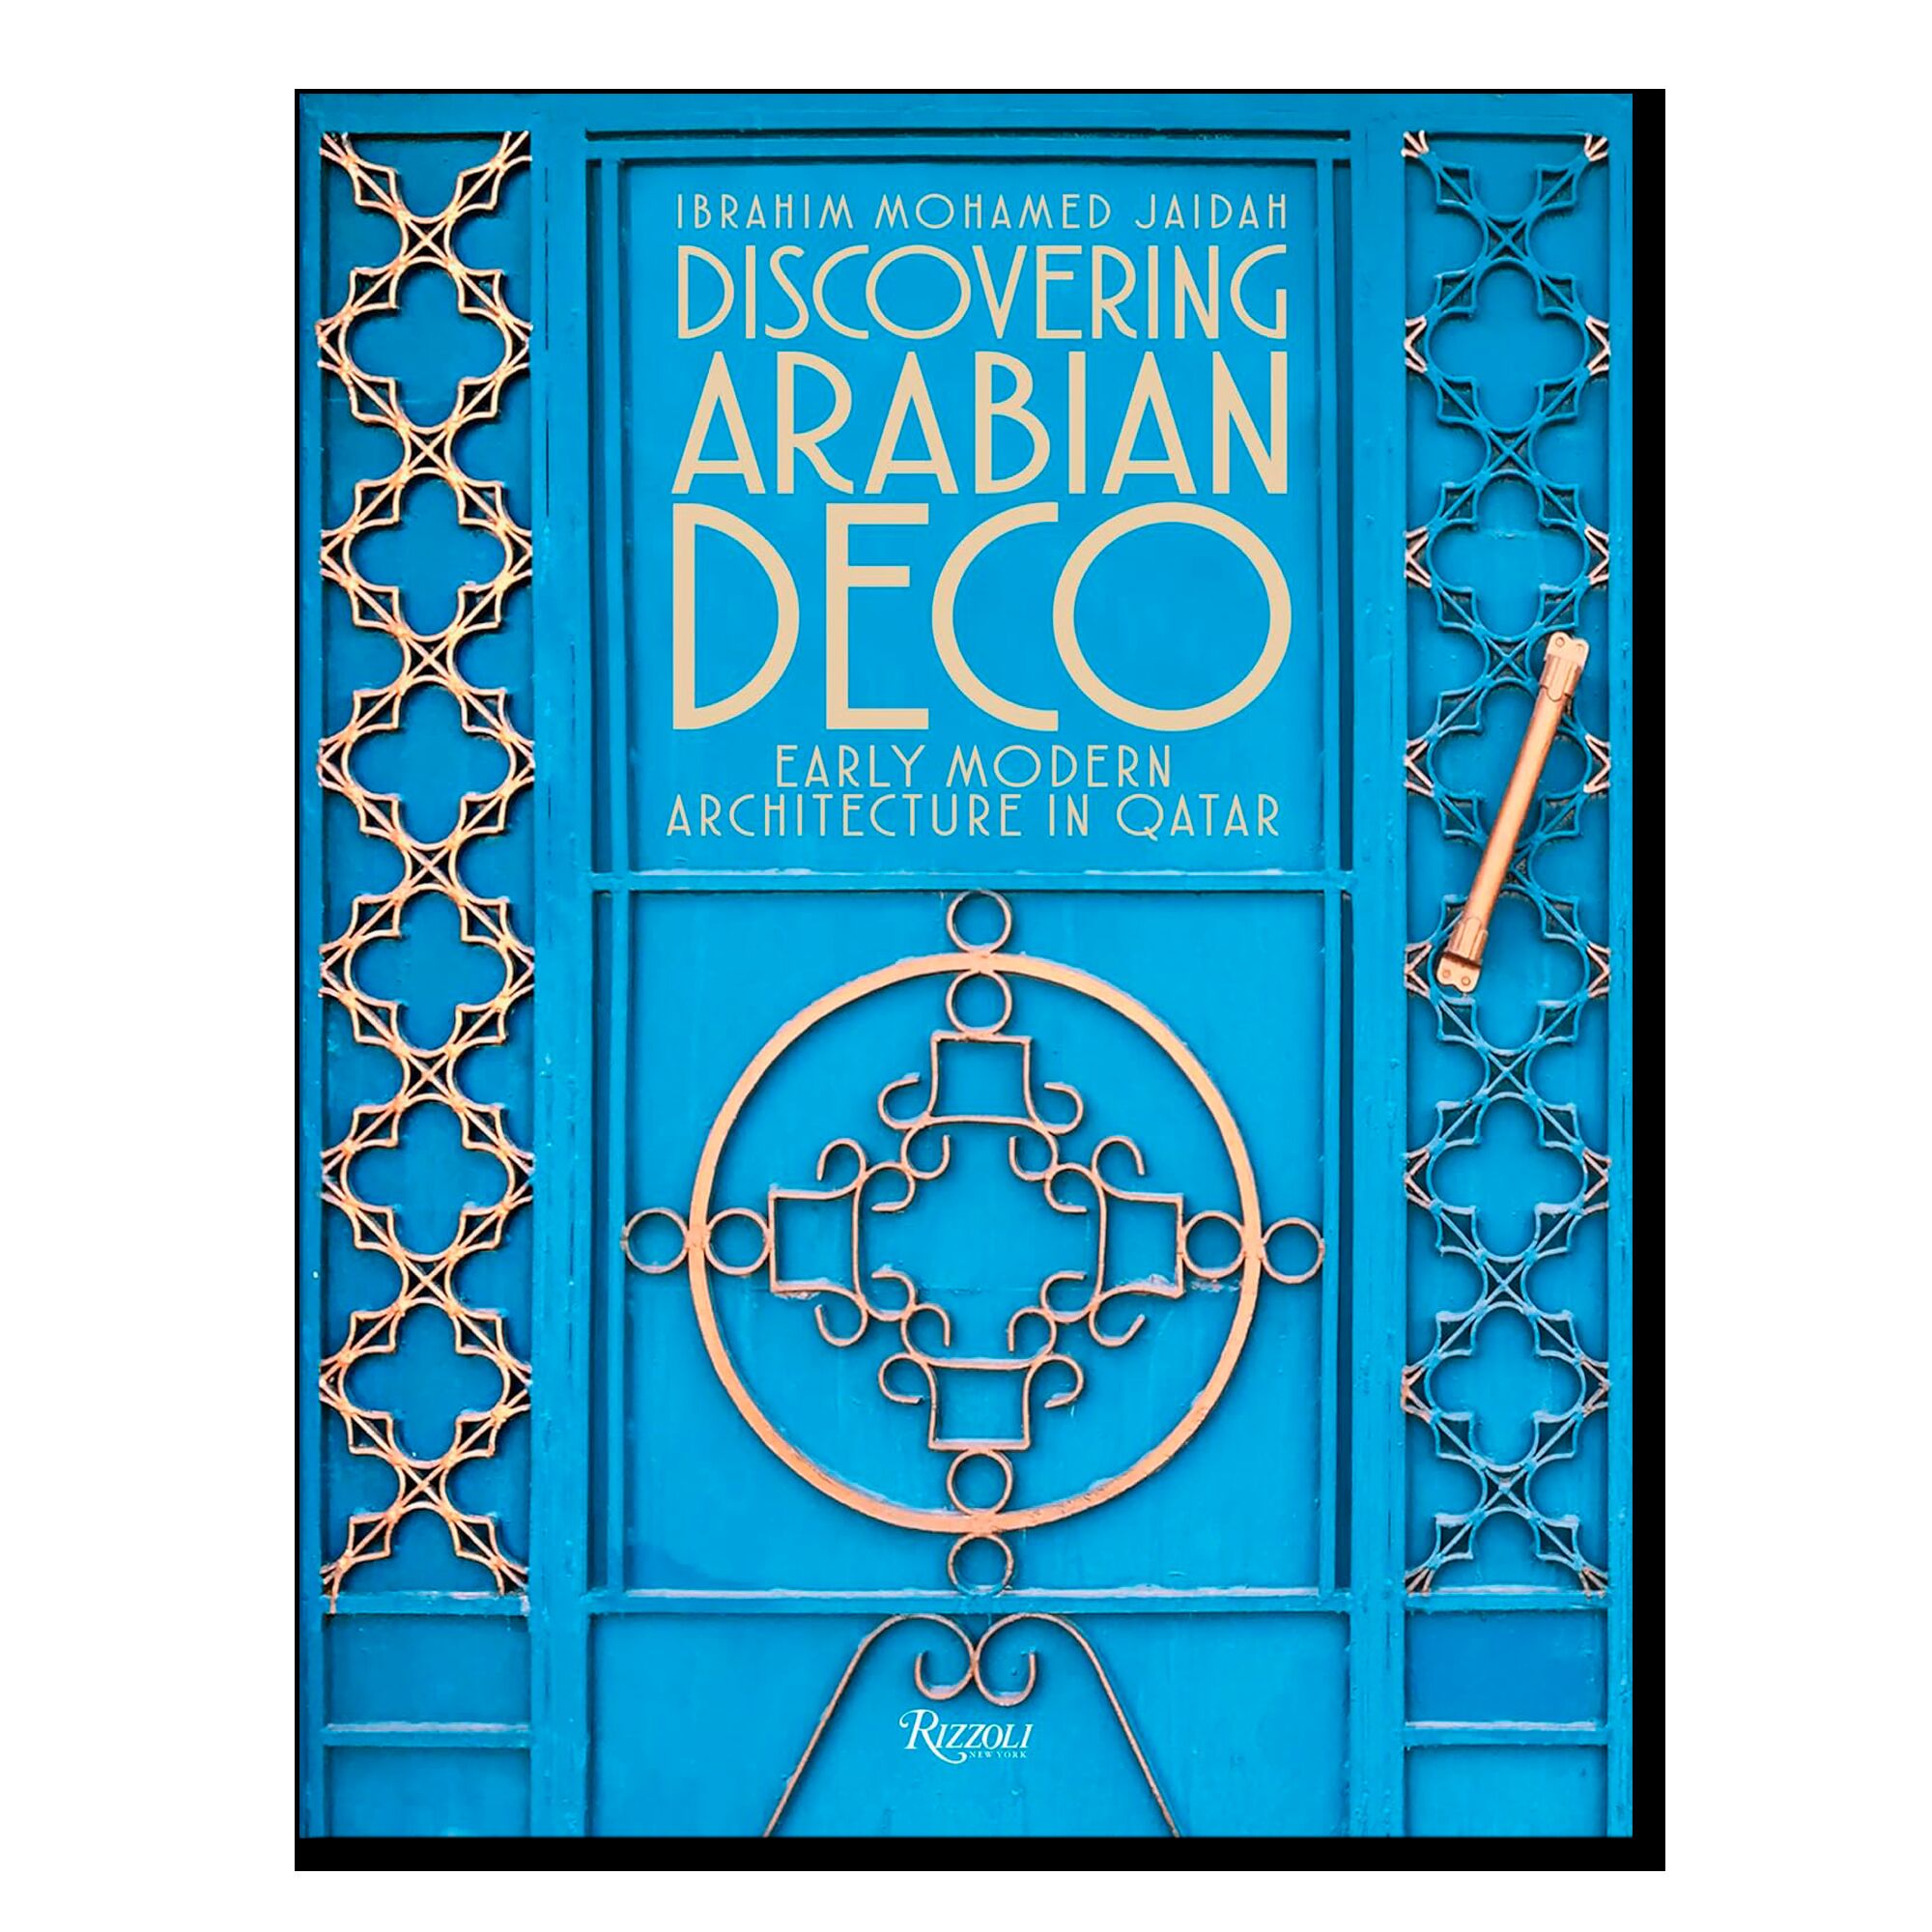 Discovering Arabian Deco: Early Modern Architecture in Qatar